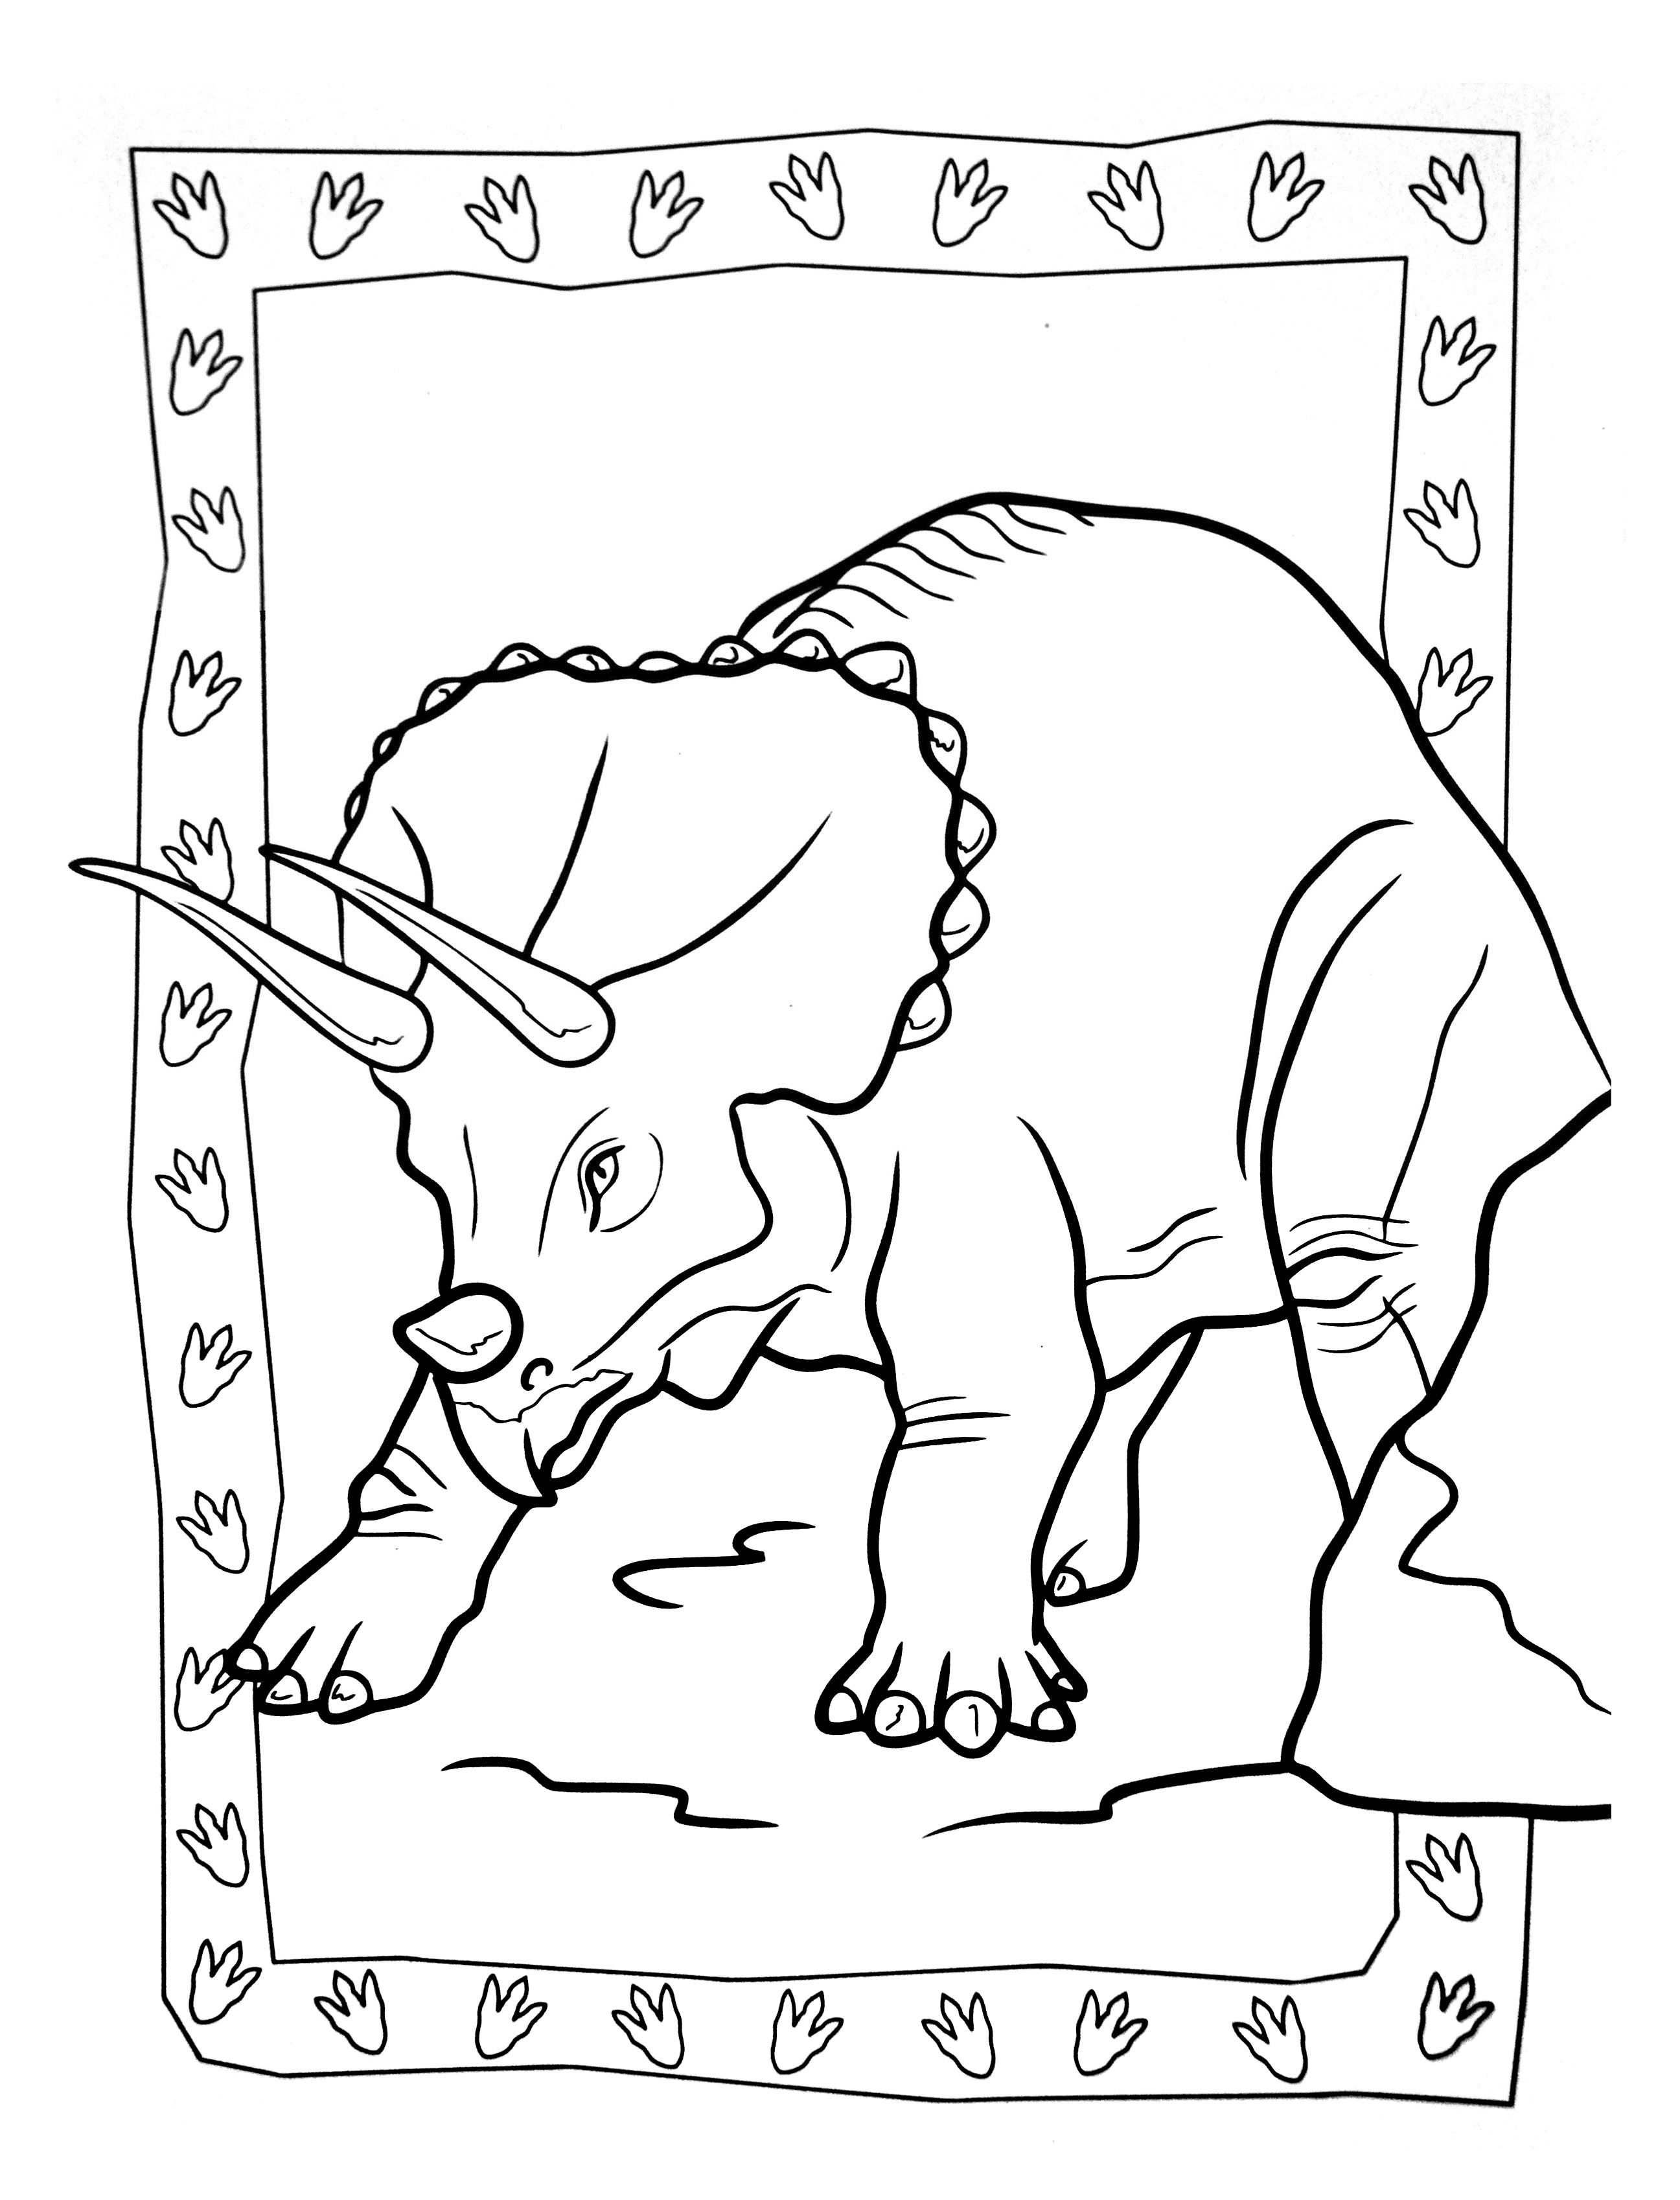 A Triceratops just waiting for some color